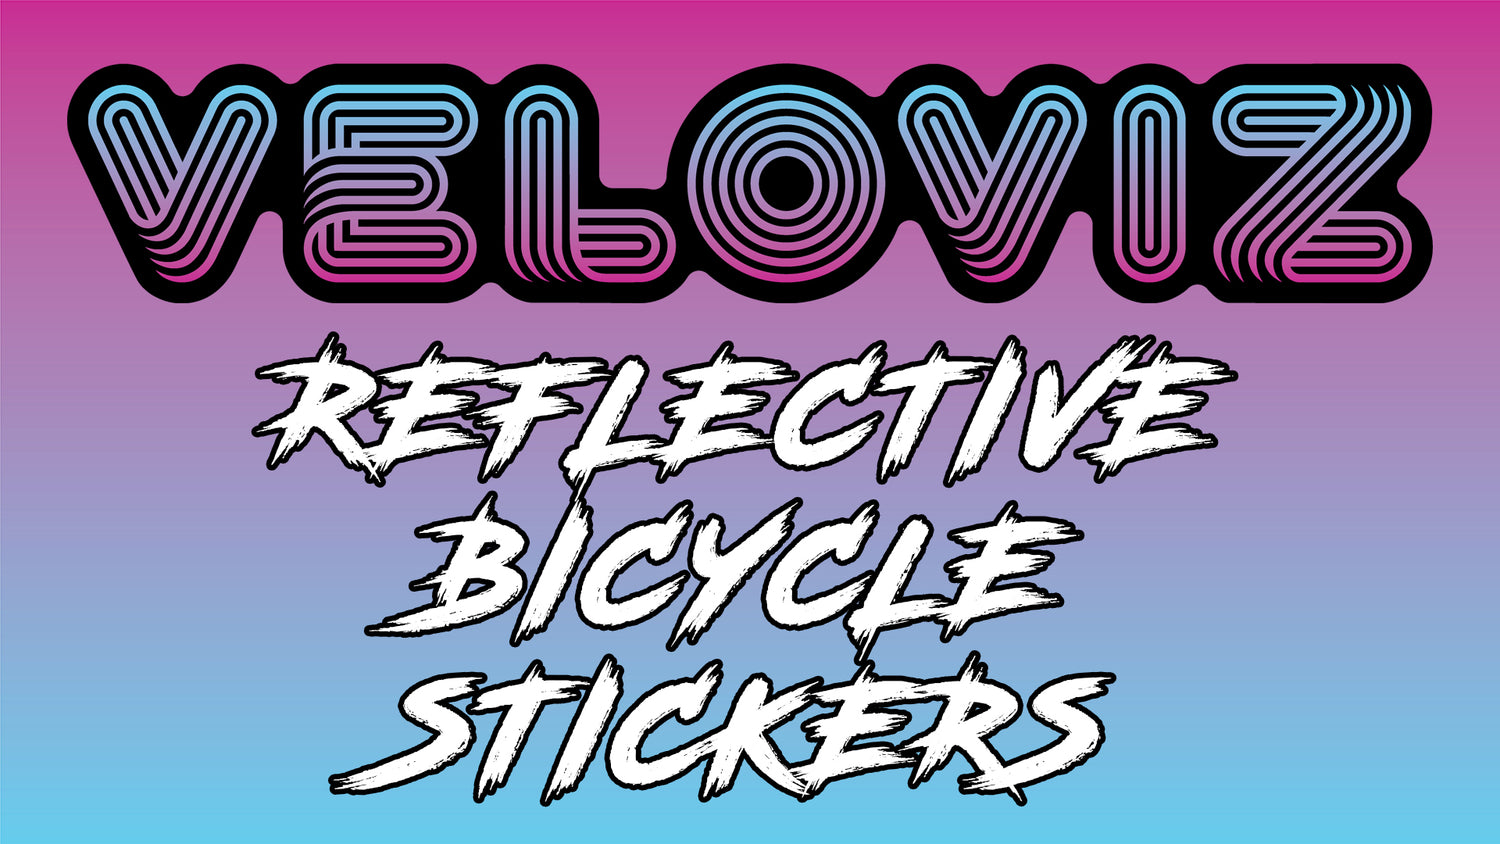 Reflective Bicycle Decals and Bike Helmet Stickers Velosight™ Stars Decals  White/silver Free US Shipping 